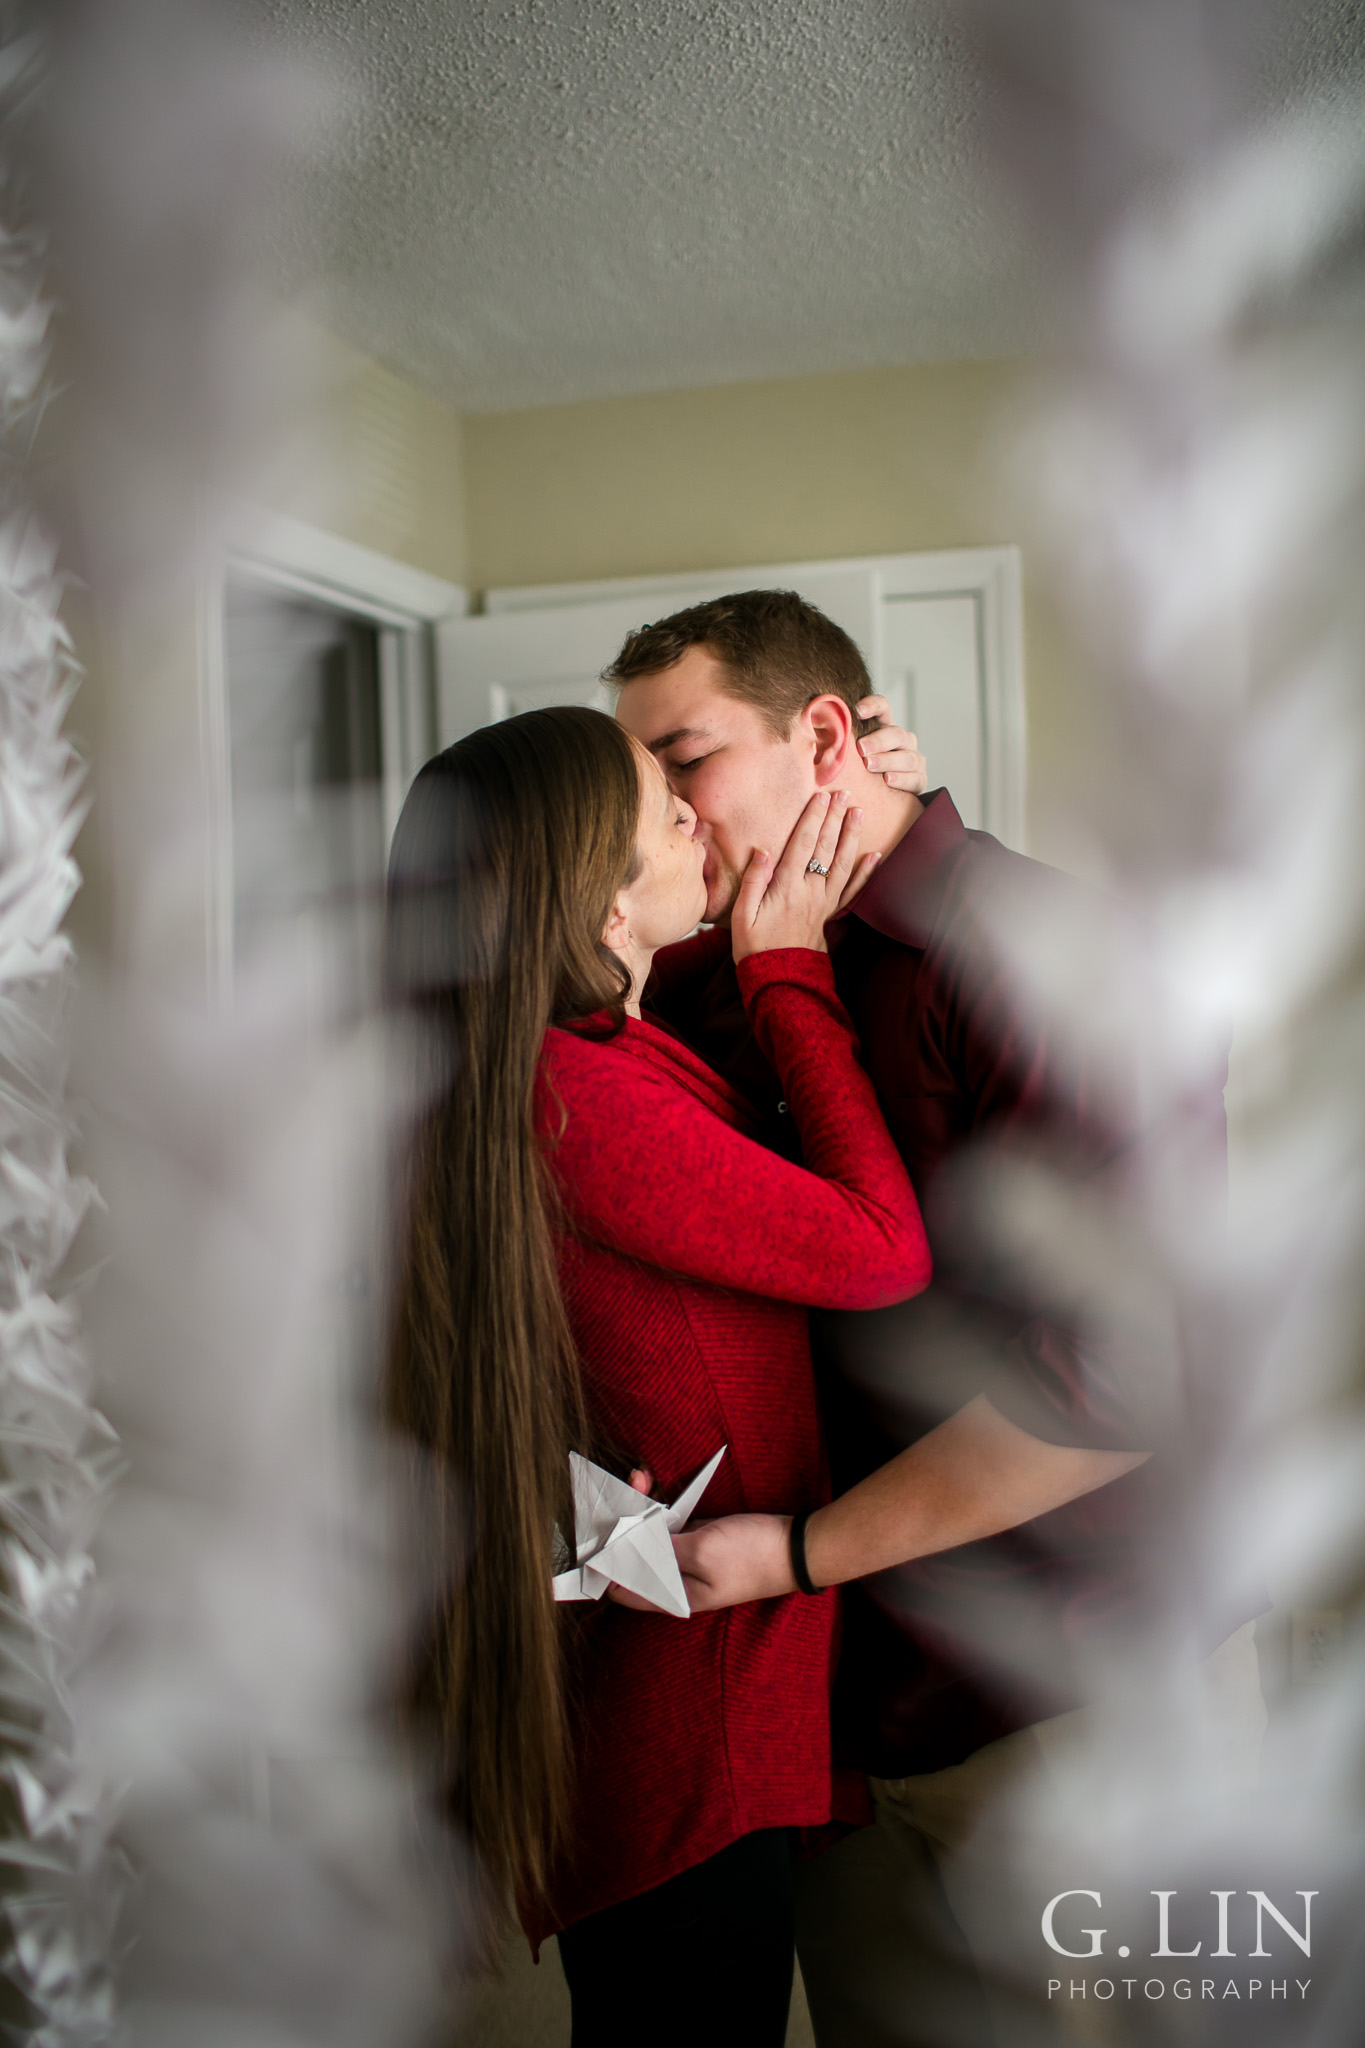 Creative and artistic proposal photo | Raleigh Engagement Photographer | By G. Lin Photography